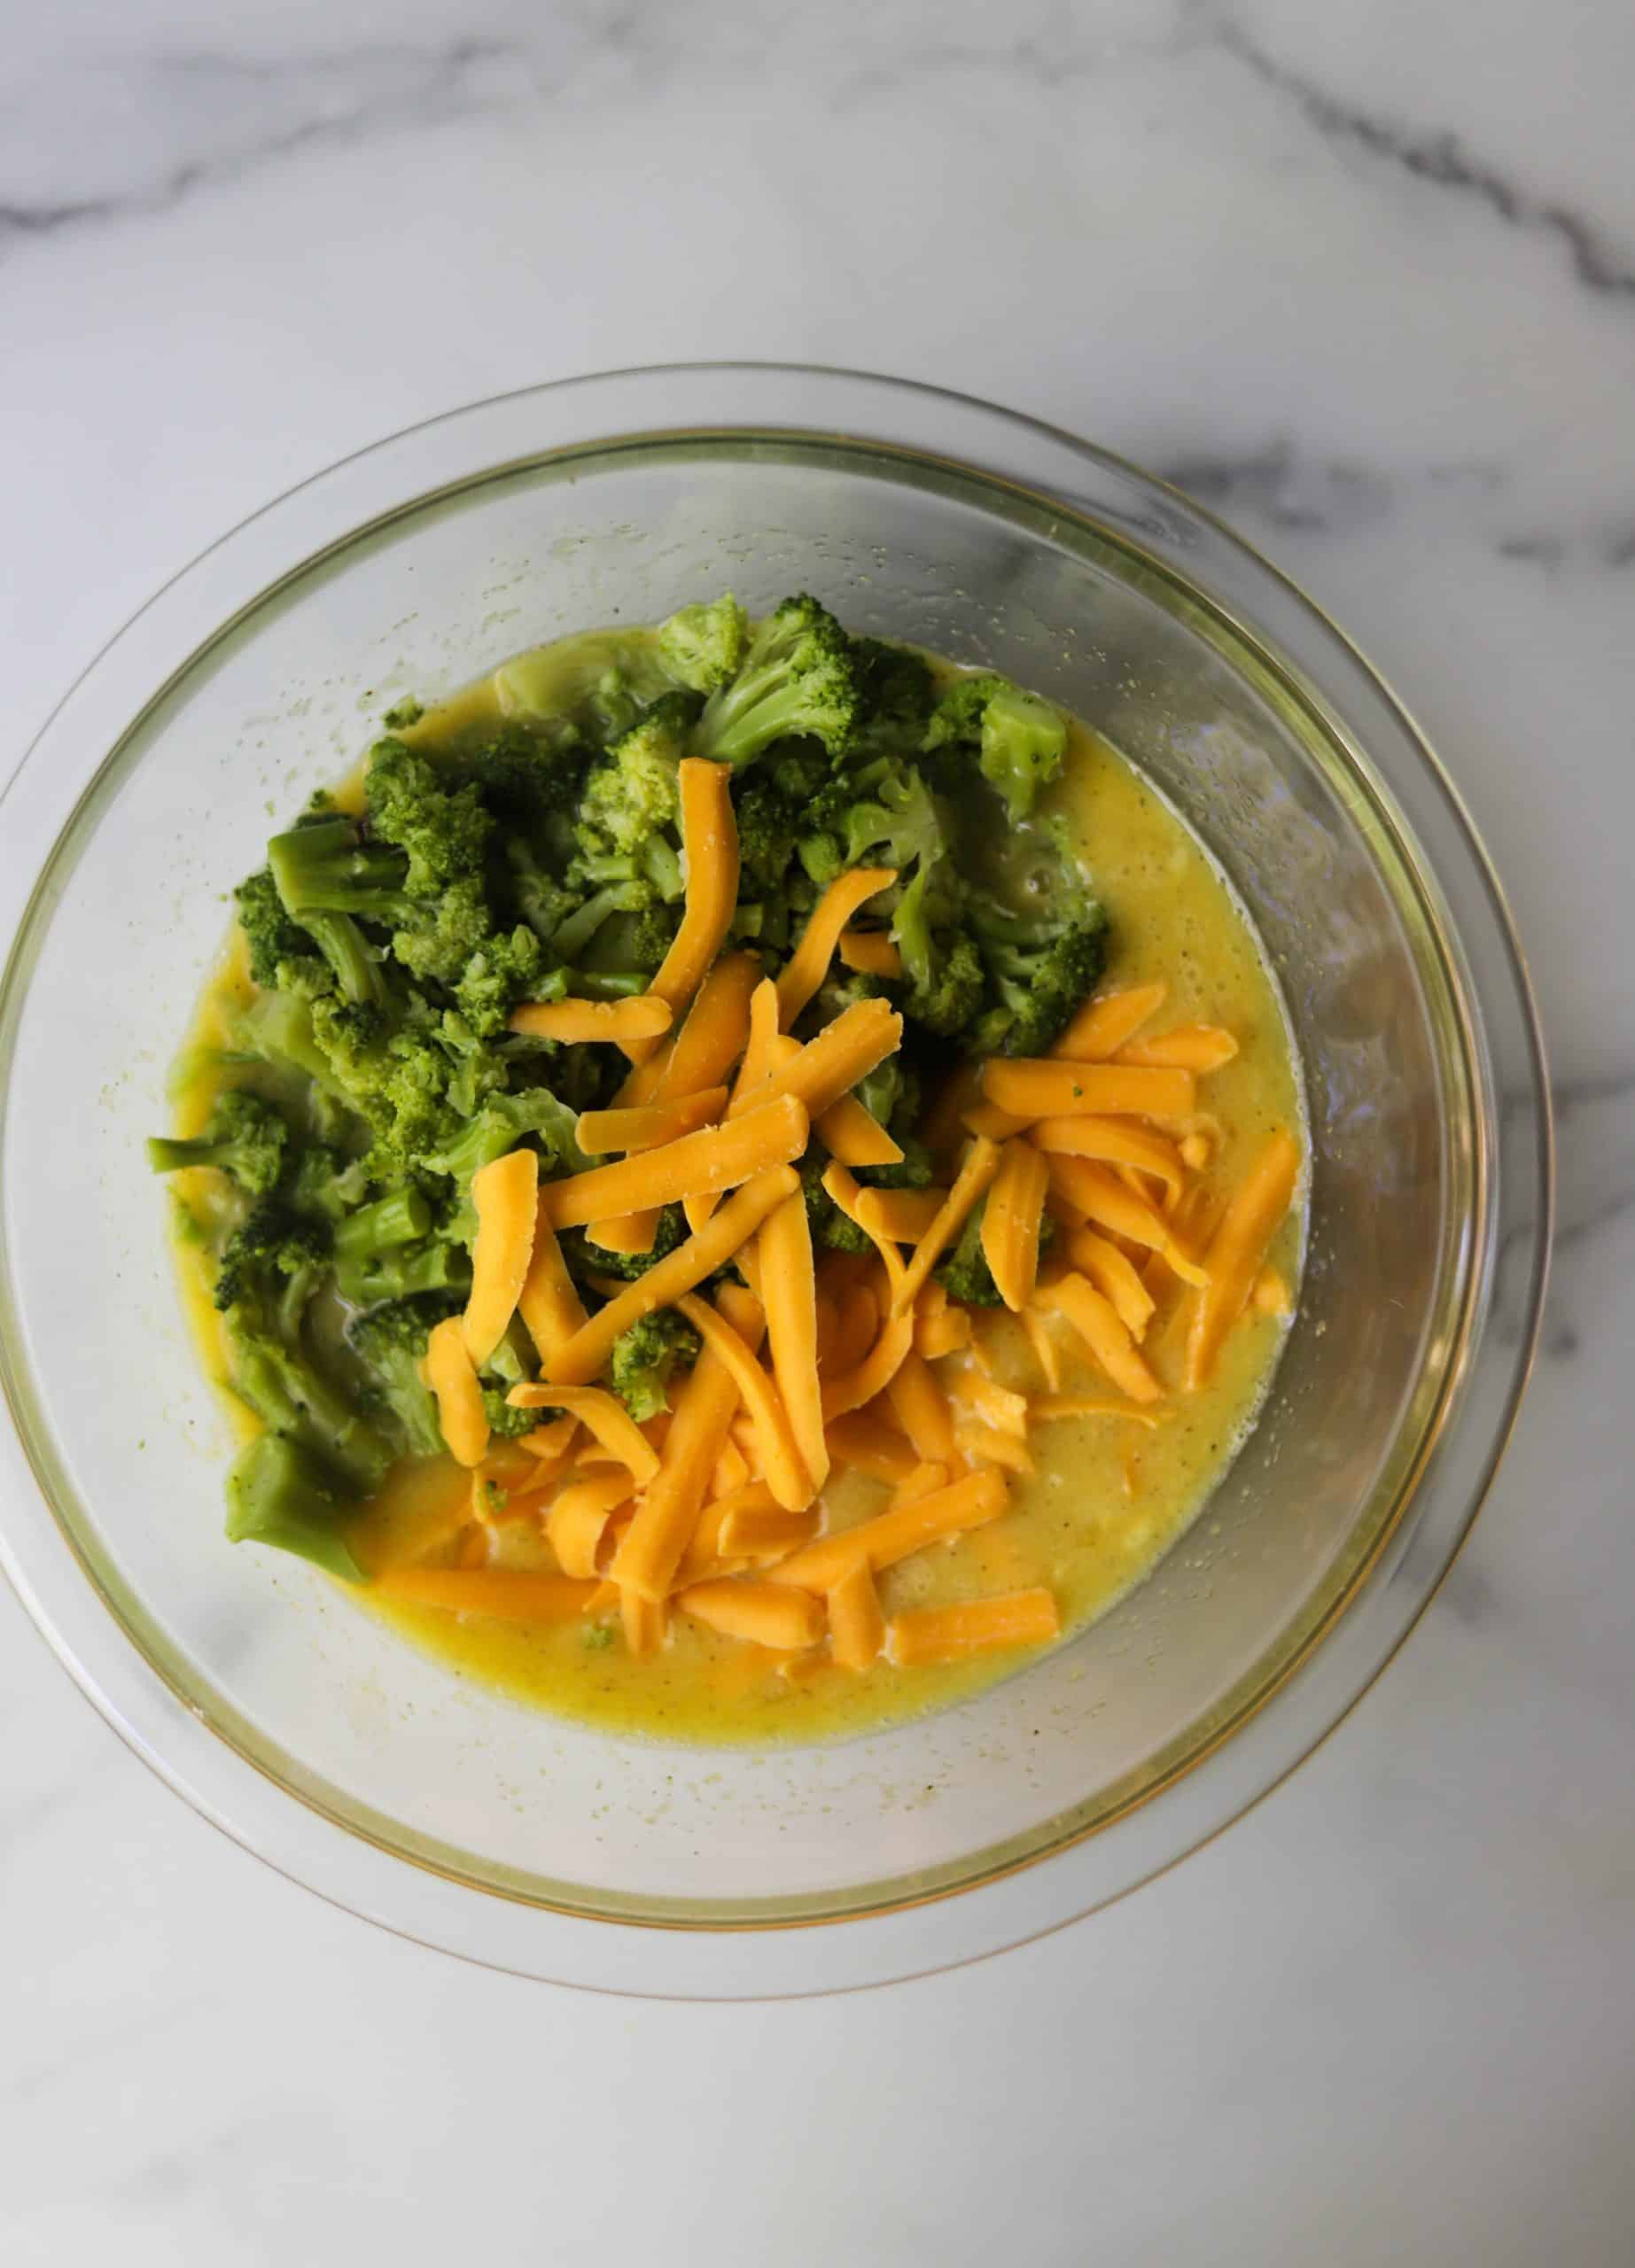 A bowl of egg mixture with broccoli.